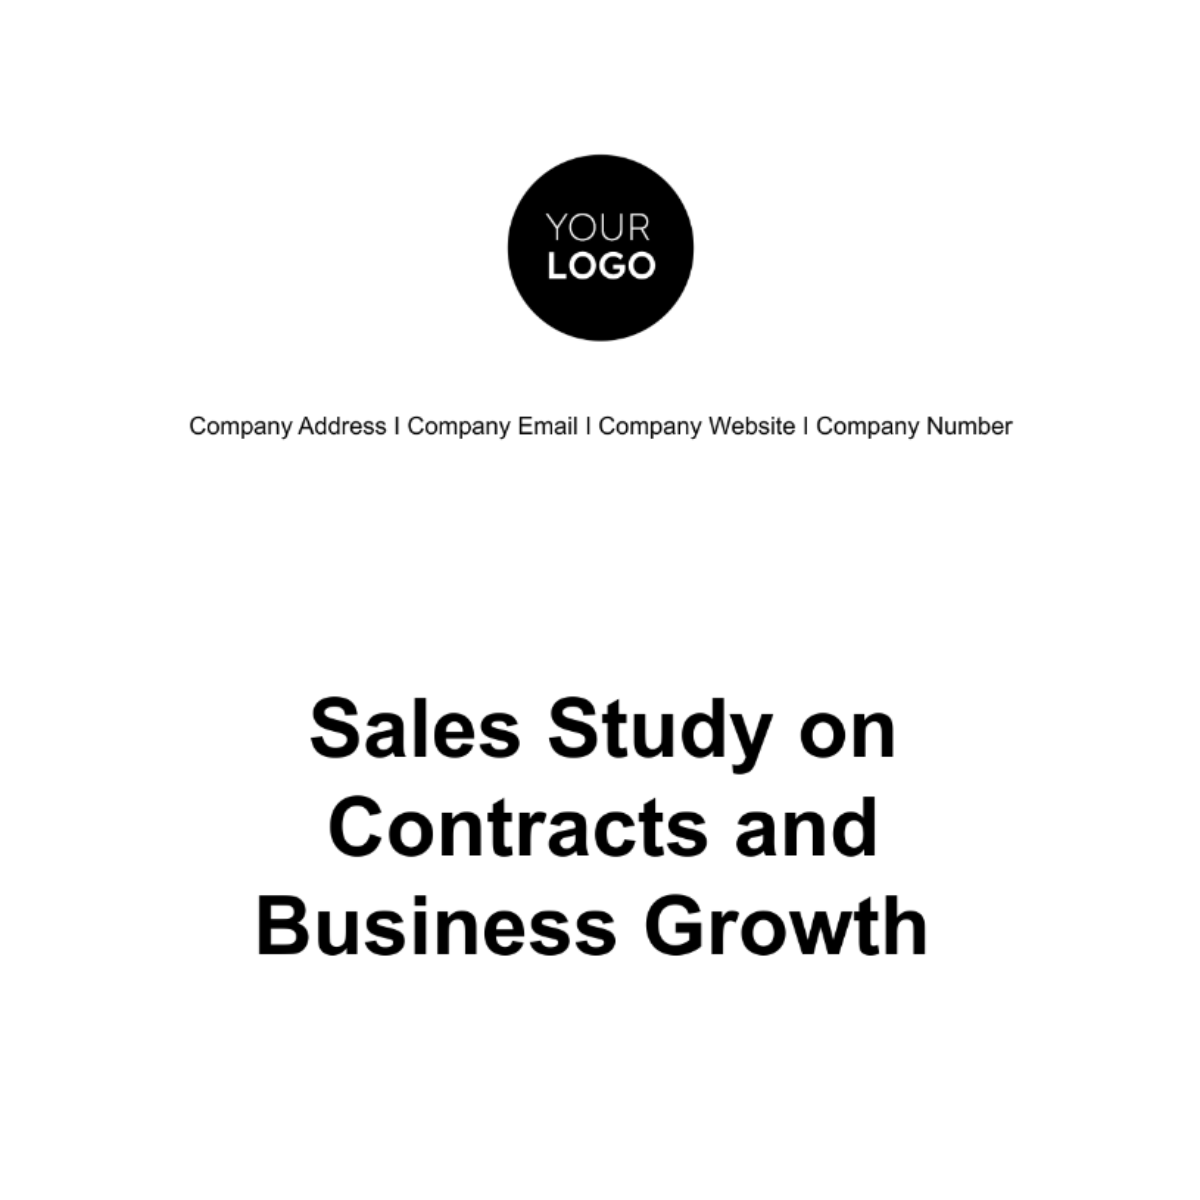 Sales Study on Contracts and Business Growth Template